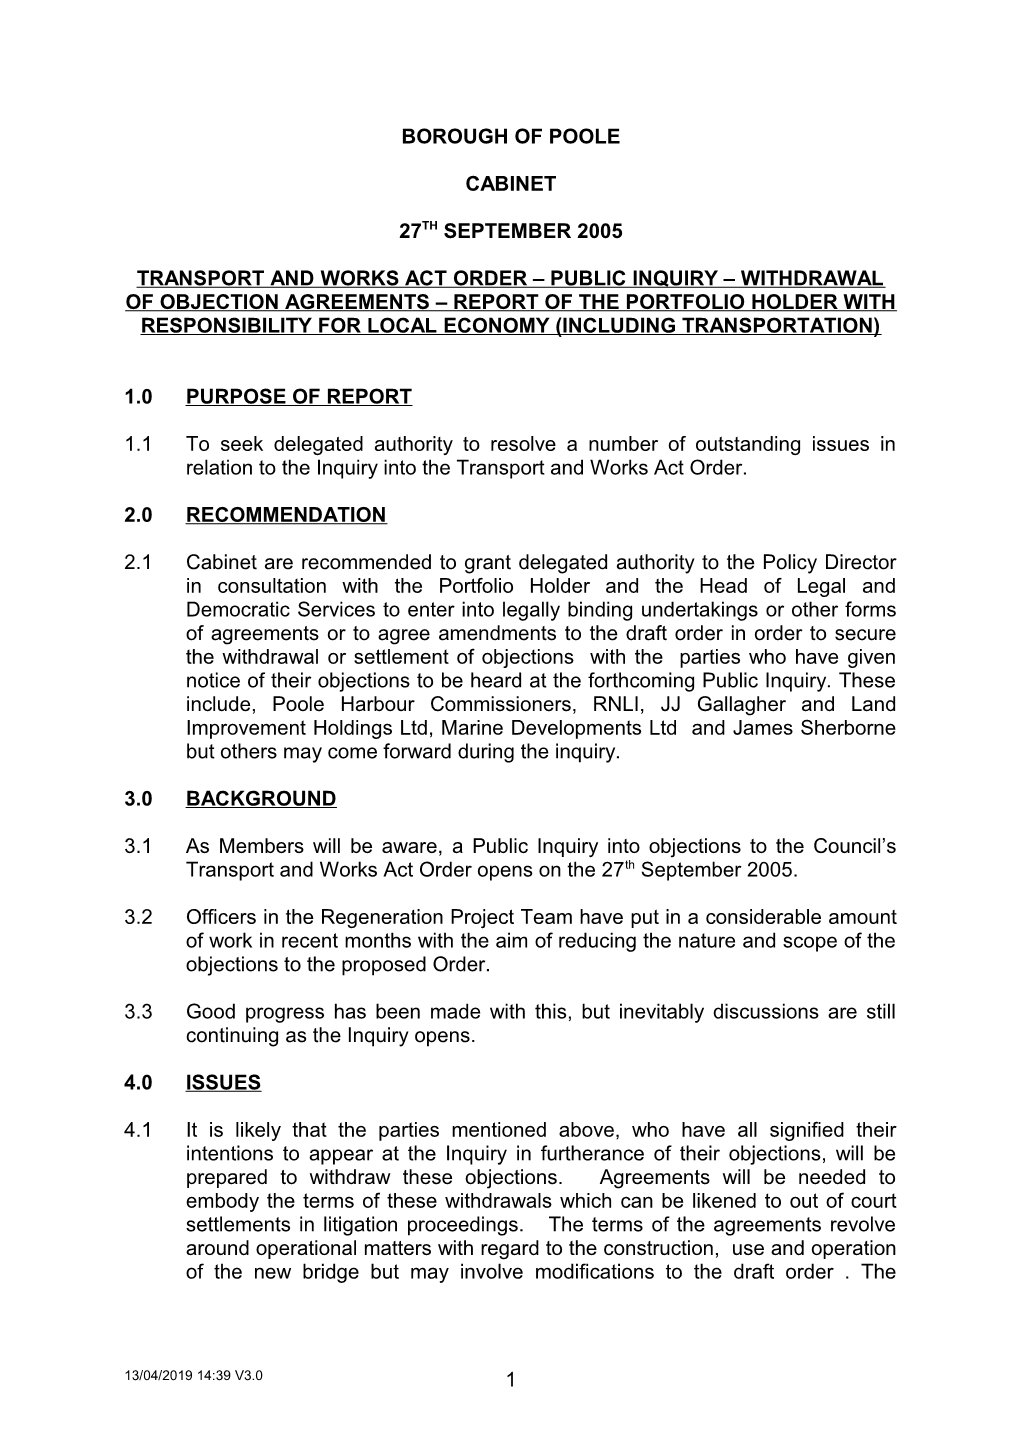 Transport and Works Act Order Public Inquiry Withdrawal of Objection Agreements Report